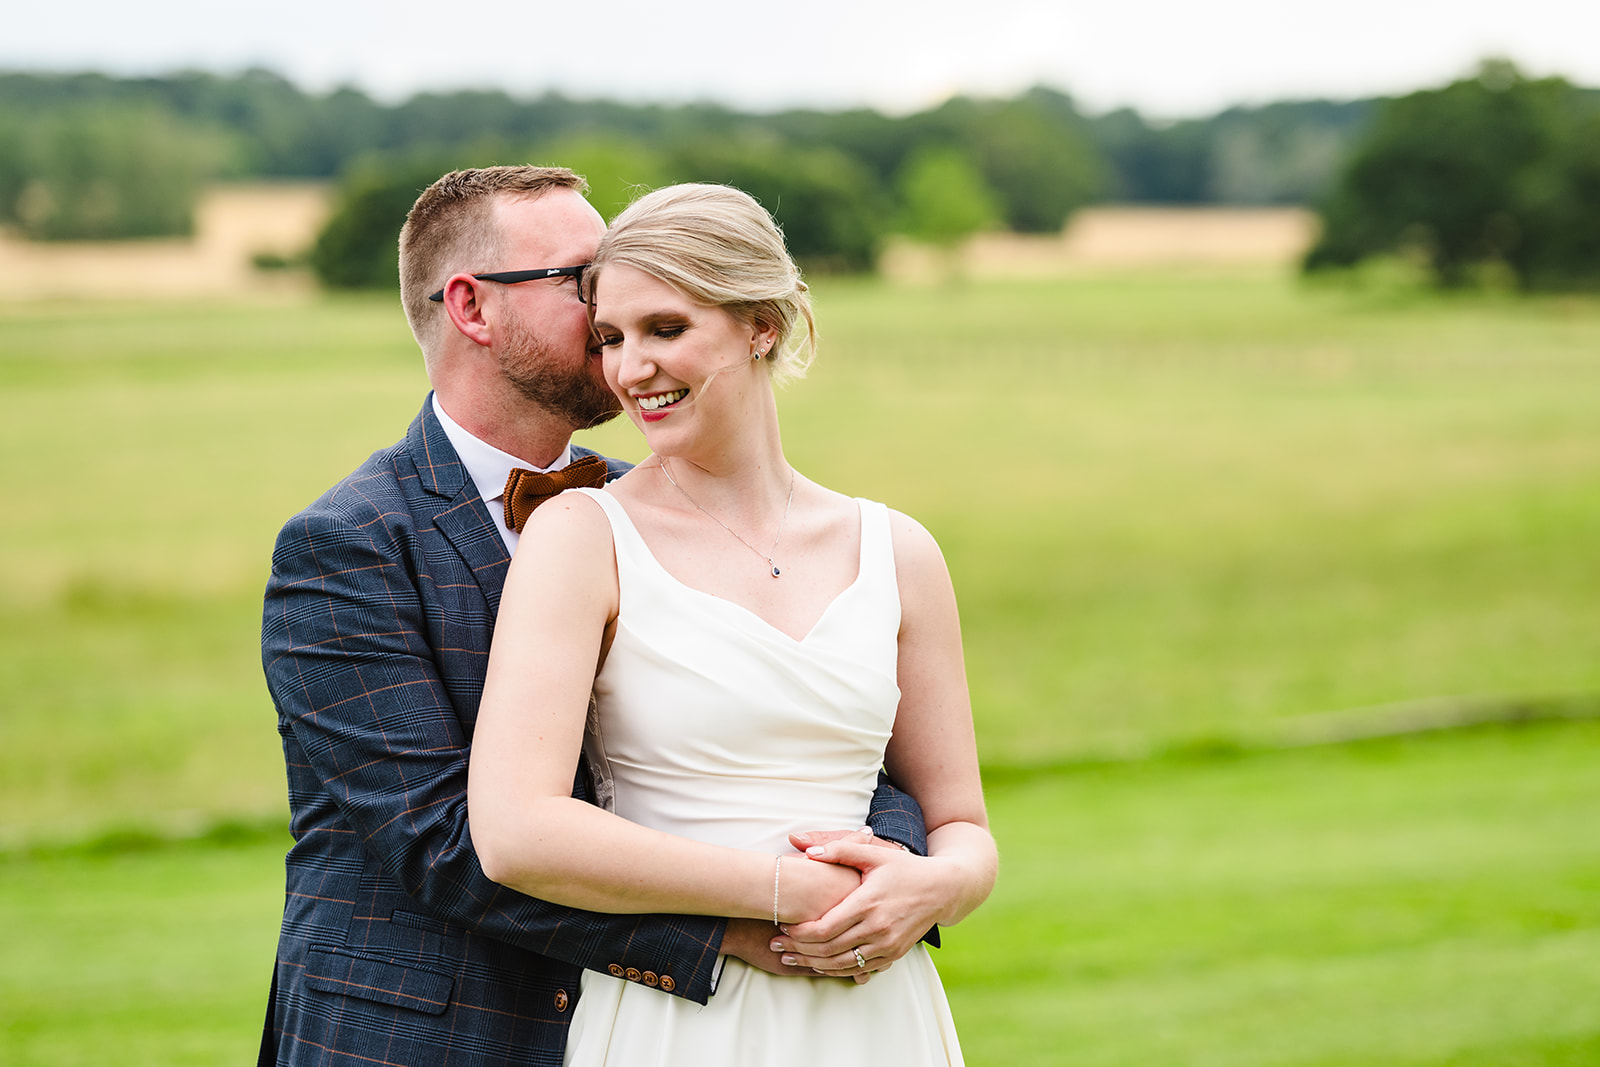 Bride and groom embracing during their wedding photos at Stapleford park by Amanda Forman Photography